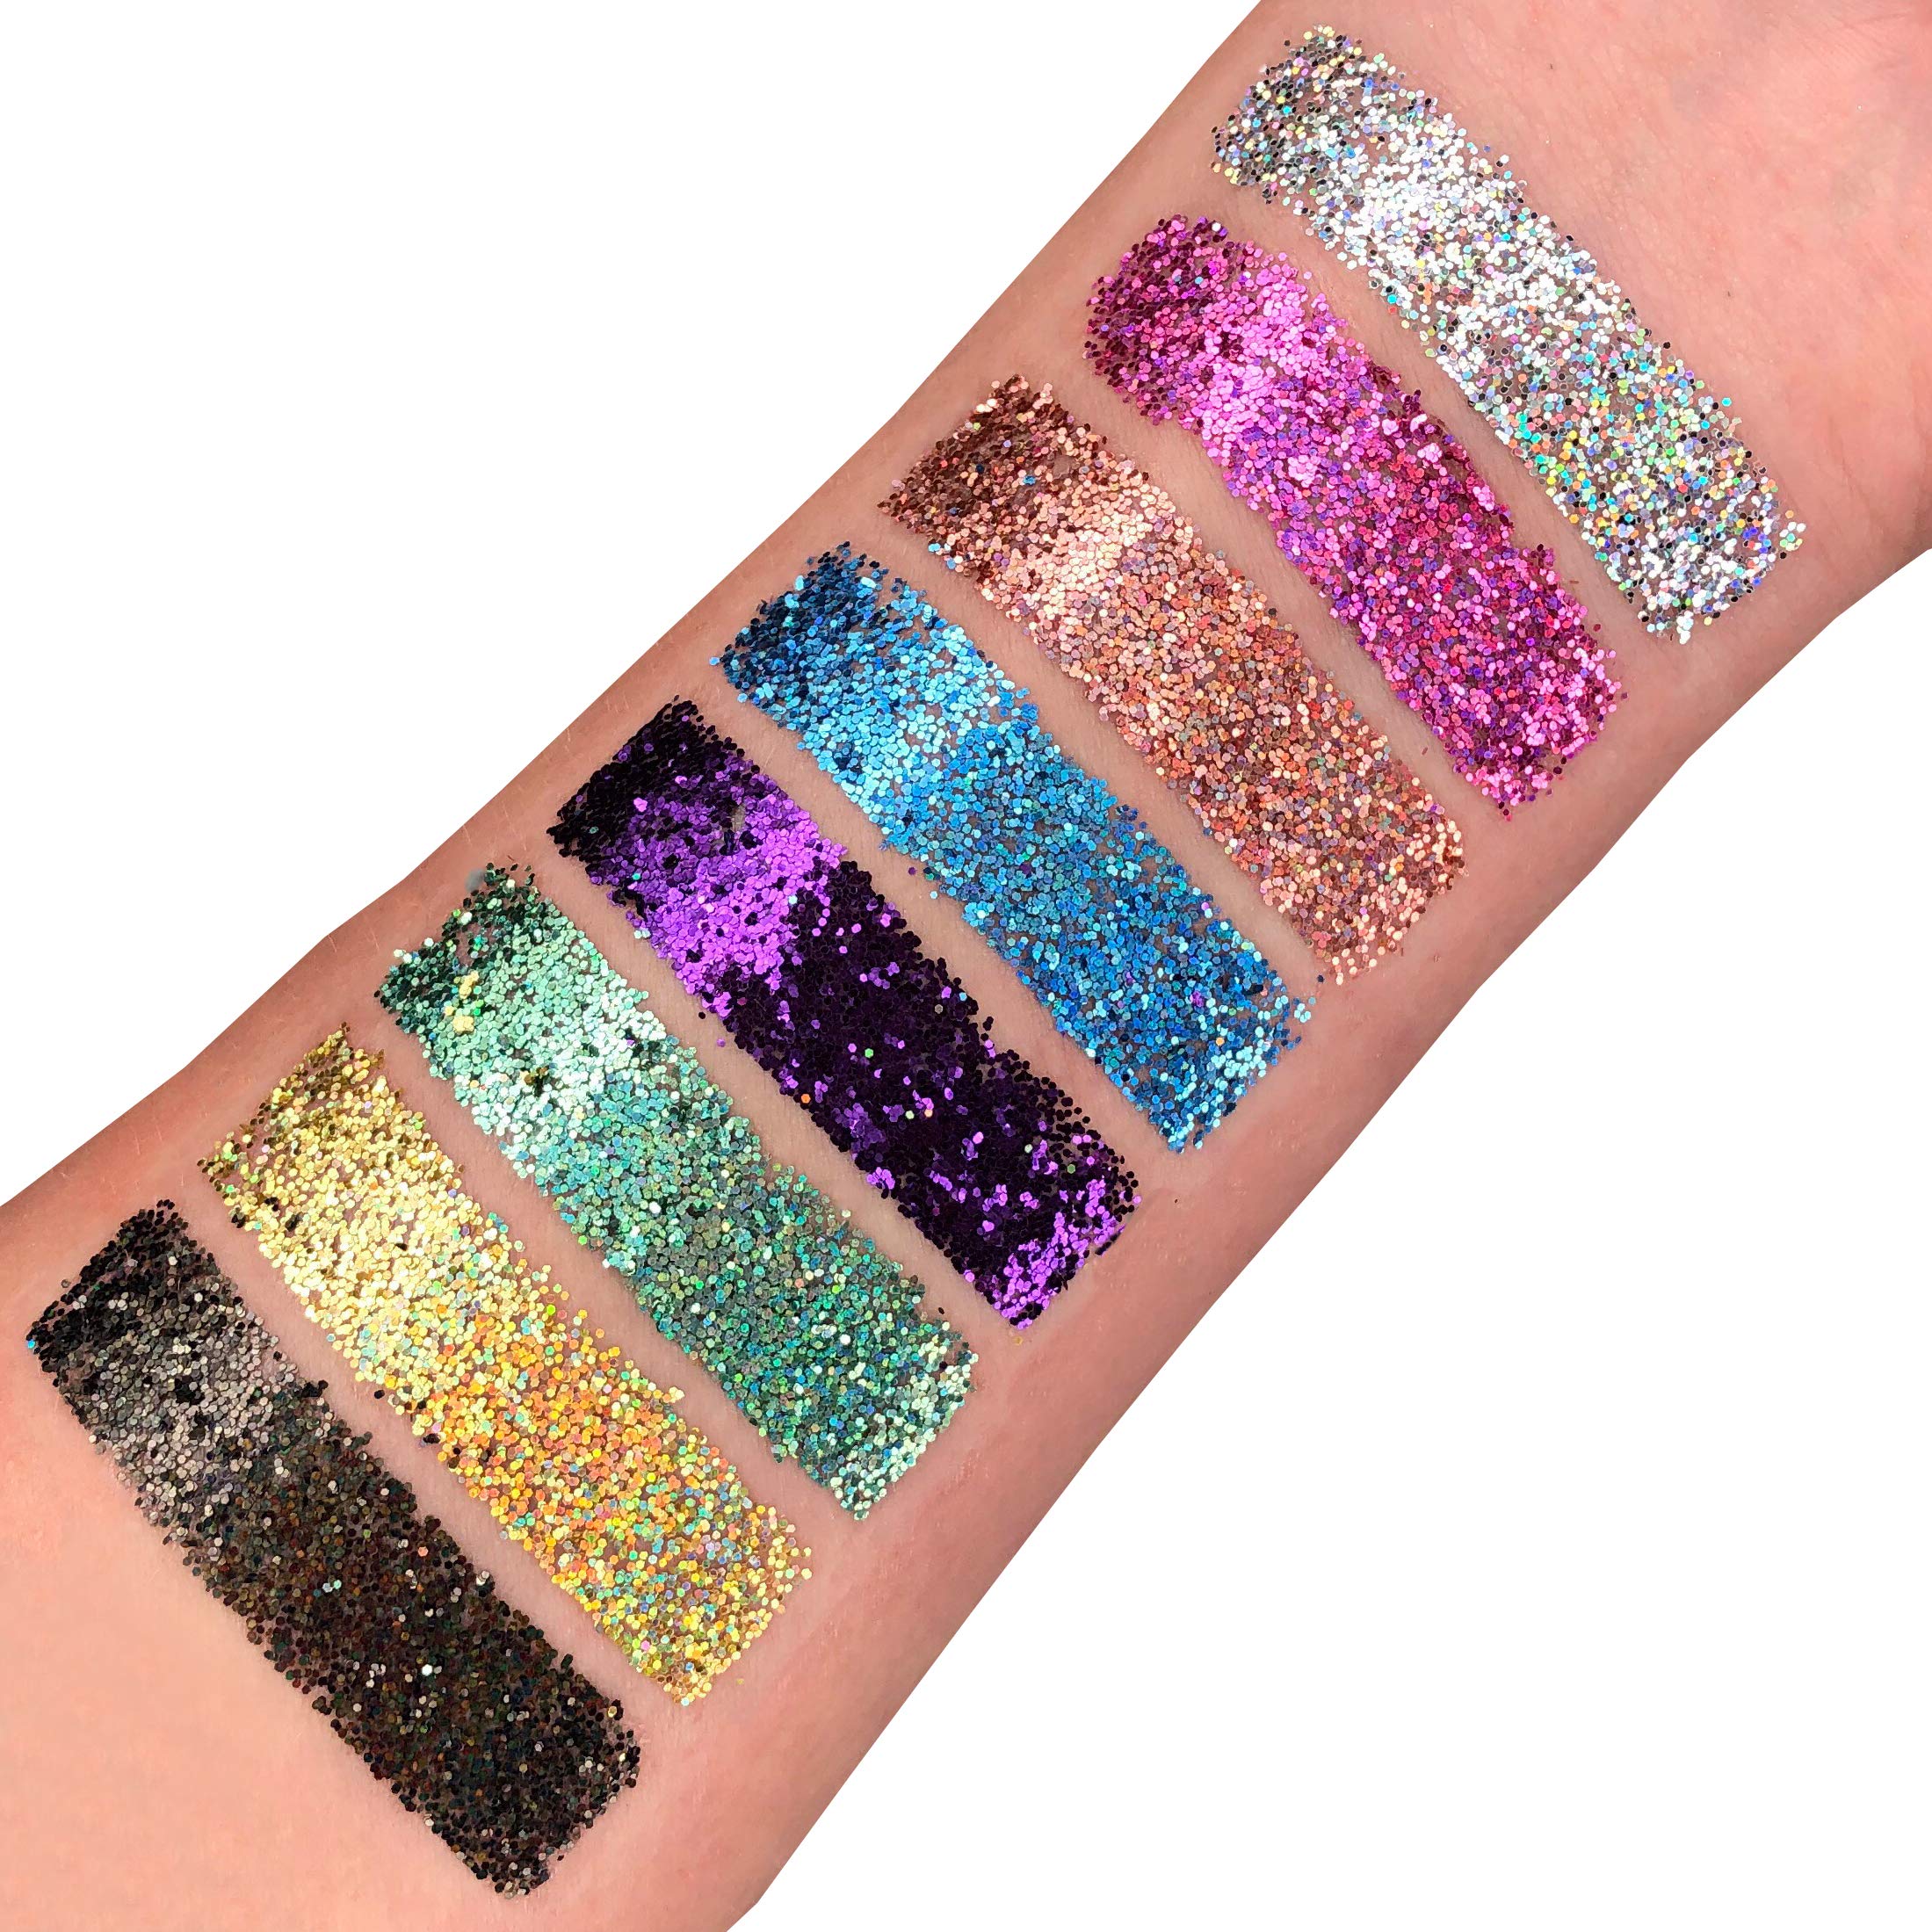 Moon Glitter Holographic Glitter Shakers 100% Cosmetic Glitter for Face, Body, Nails, Hair and Lips - 0.17oz - Rose Gold